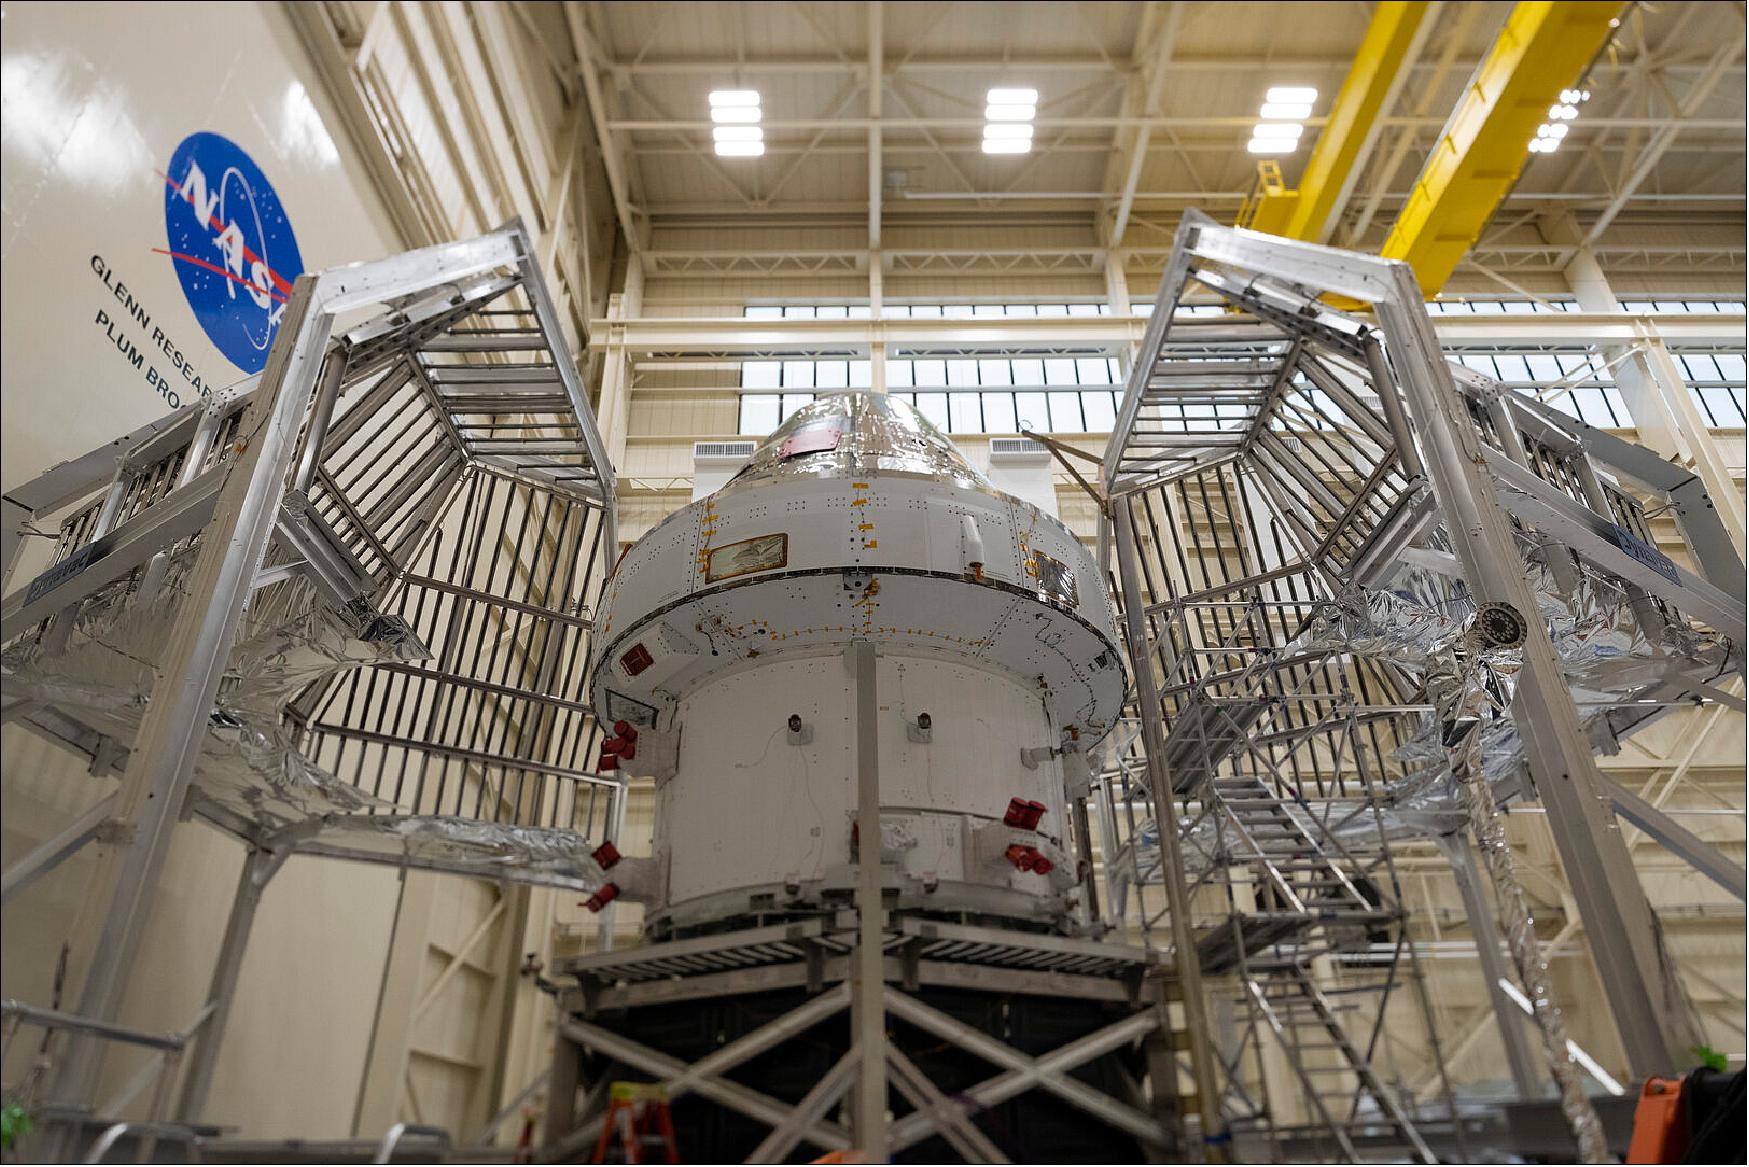 Figure 49: The Orion spacecraft with European Service Module at NASA’s Plum Brook Station. The first Orion will fly farther from Earth on the Artemis I mission than any human-rated vehicle has ever flown before – but first it will undergo testing to ensure the spacecraft withstands the extremes of spaceflight. In this figure, Orion is being placed in a cage, called the Thermal Enclosure Structure (TES), that will radiate infrared heat during the tests inside the vacuum chamber (image credit: ESA, S. Corvaja)